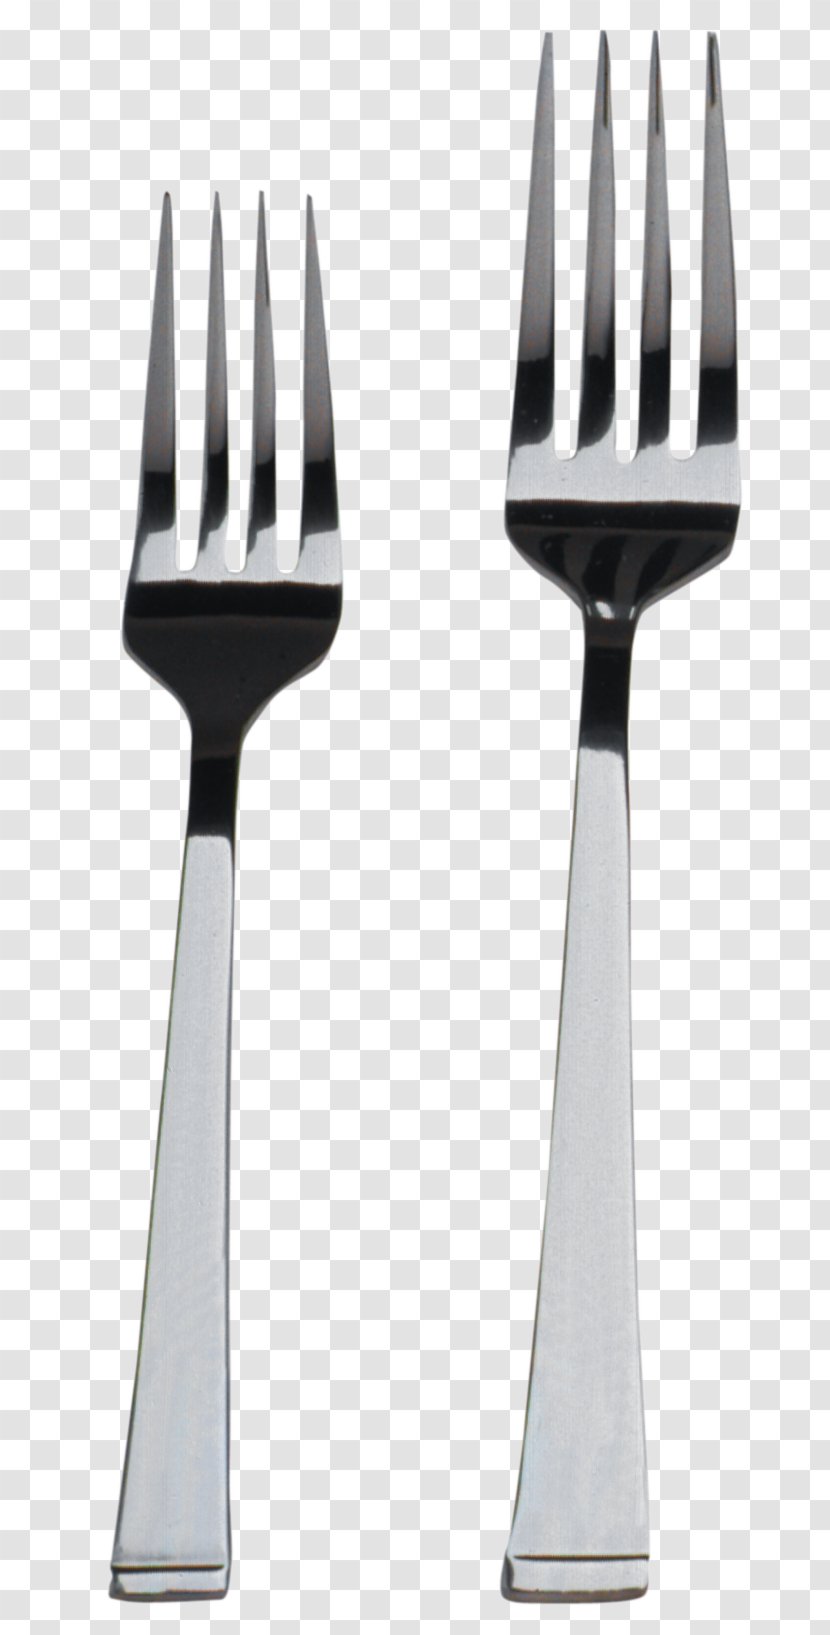 Cutlery Fork Tableware Tool - Kitchen Tools Transparent PNG